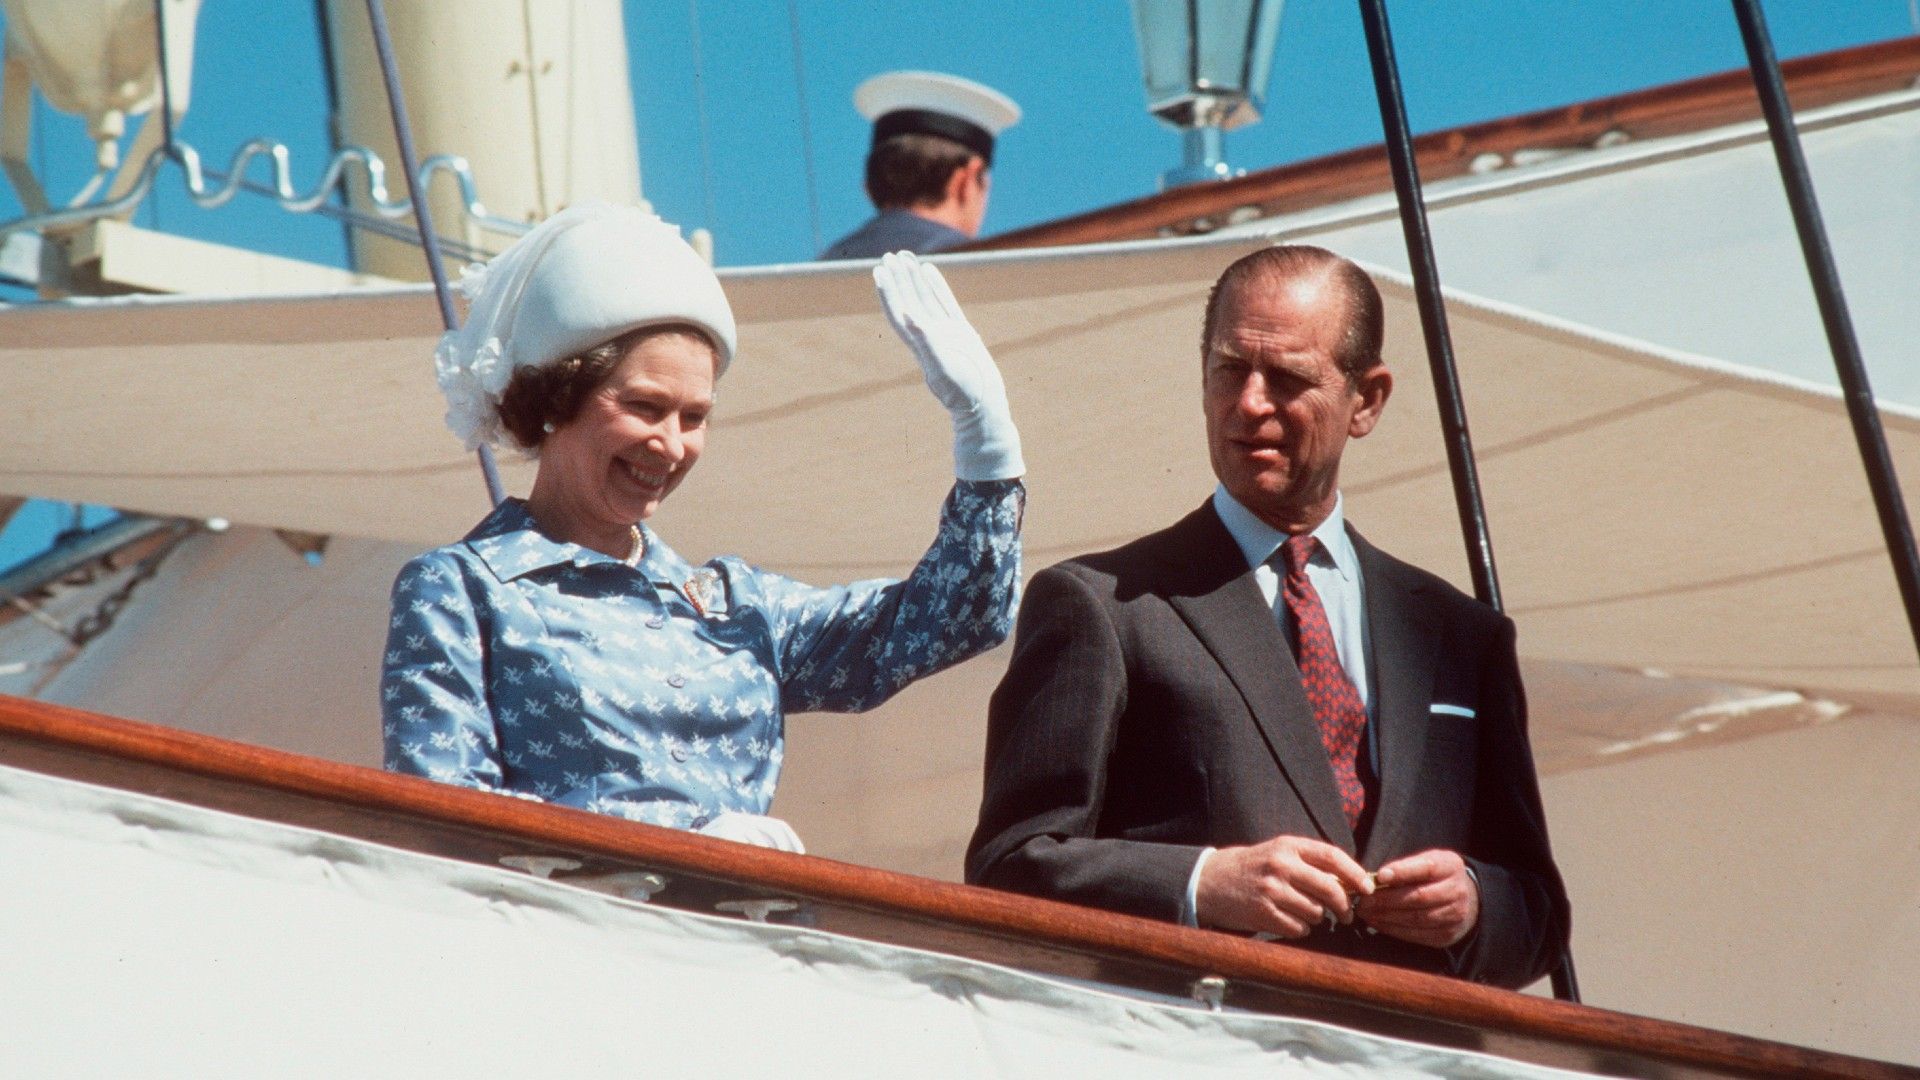 <p>                     Prince Philip and the Queen delighted crowds in Kuwait when they visited the country in February 1979.                   </p>                                      <p>                     Though the pair arrived via plane (a Concord no less), they also had the Royal Yacht Britannia on hand as they travelled on their three-week tour of the Gulf.                   </p>                                      <p>                     One of the most iconic images of this royal tour is the pair waving from the deck of the royal yacht at the start of the tour in Kuwait. The royal yacht was also where they hosted the Emir Of Kuwait at the time, Jaber Al-Ahmad Al-Sabah, for a dinner reception. This moment was historic for another reason too; it was the very first time in history that a British monarch had visited the country.                   </p>